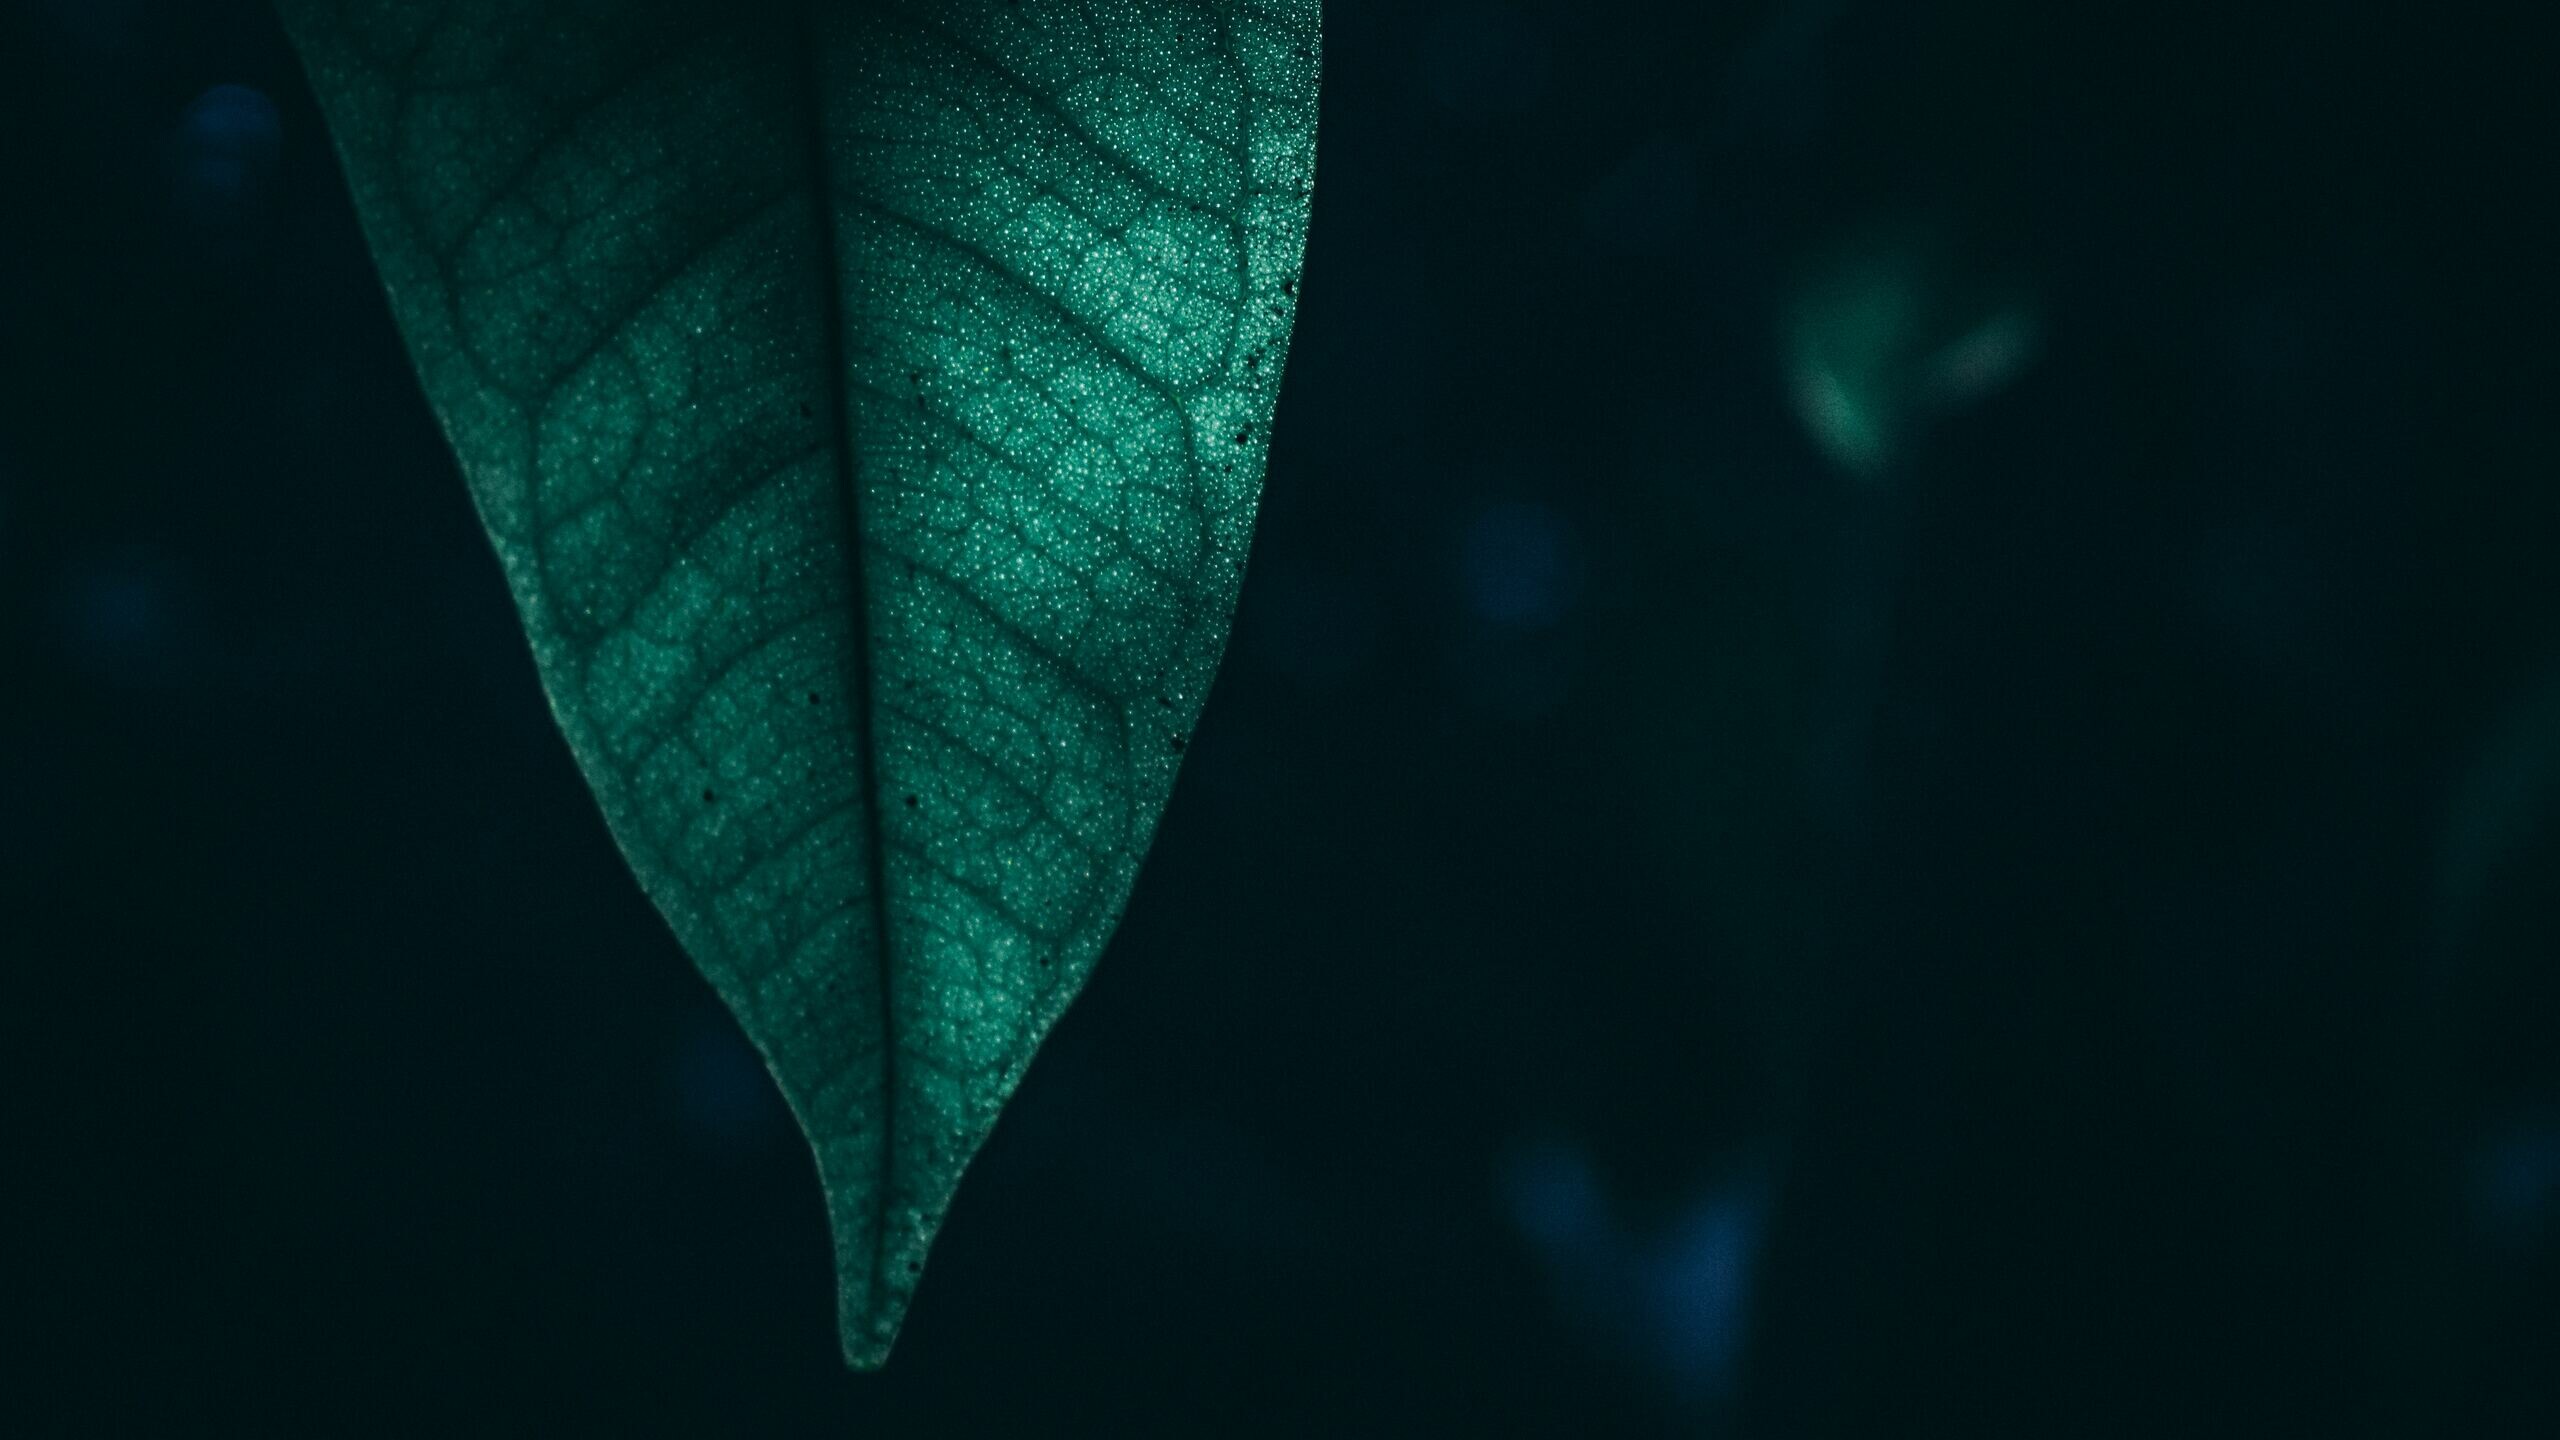 Leaf: A one of the expanded, usually green organs borne by the stem of a plant. 2560x1440 HD Background.